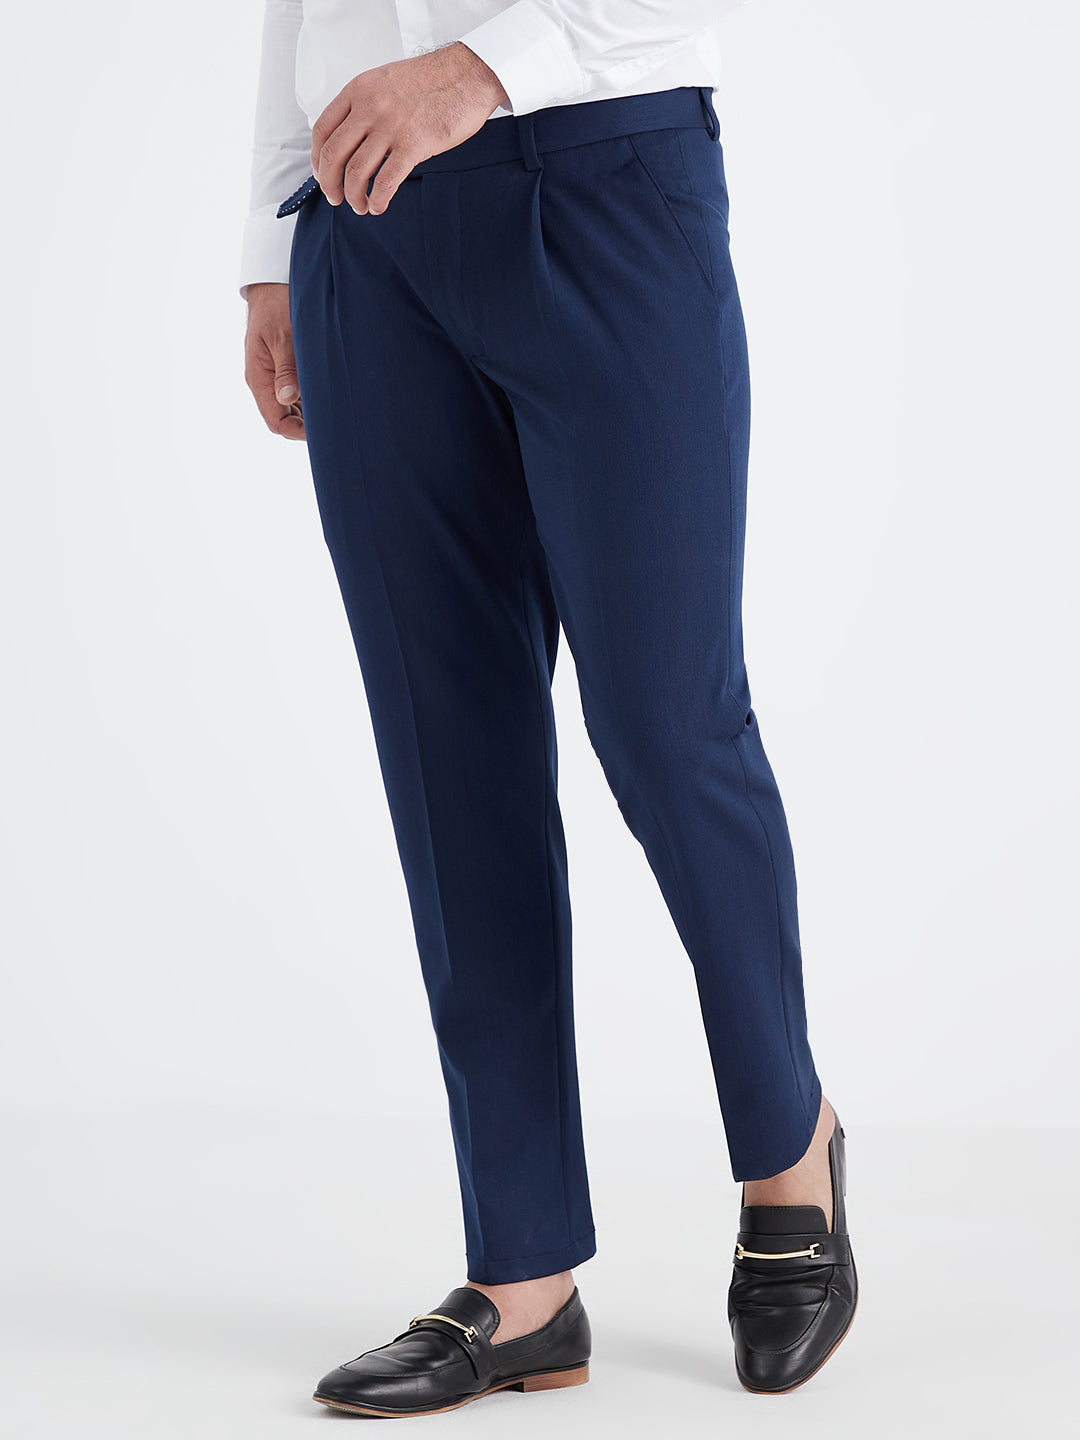 Navy Blue Stretchable Cotton Slender Fit Trousers – Stagbeetle